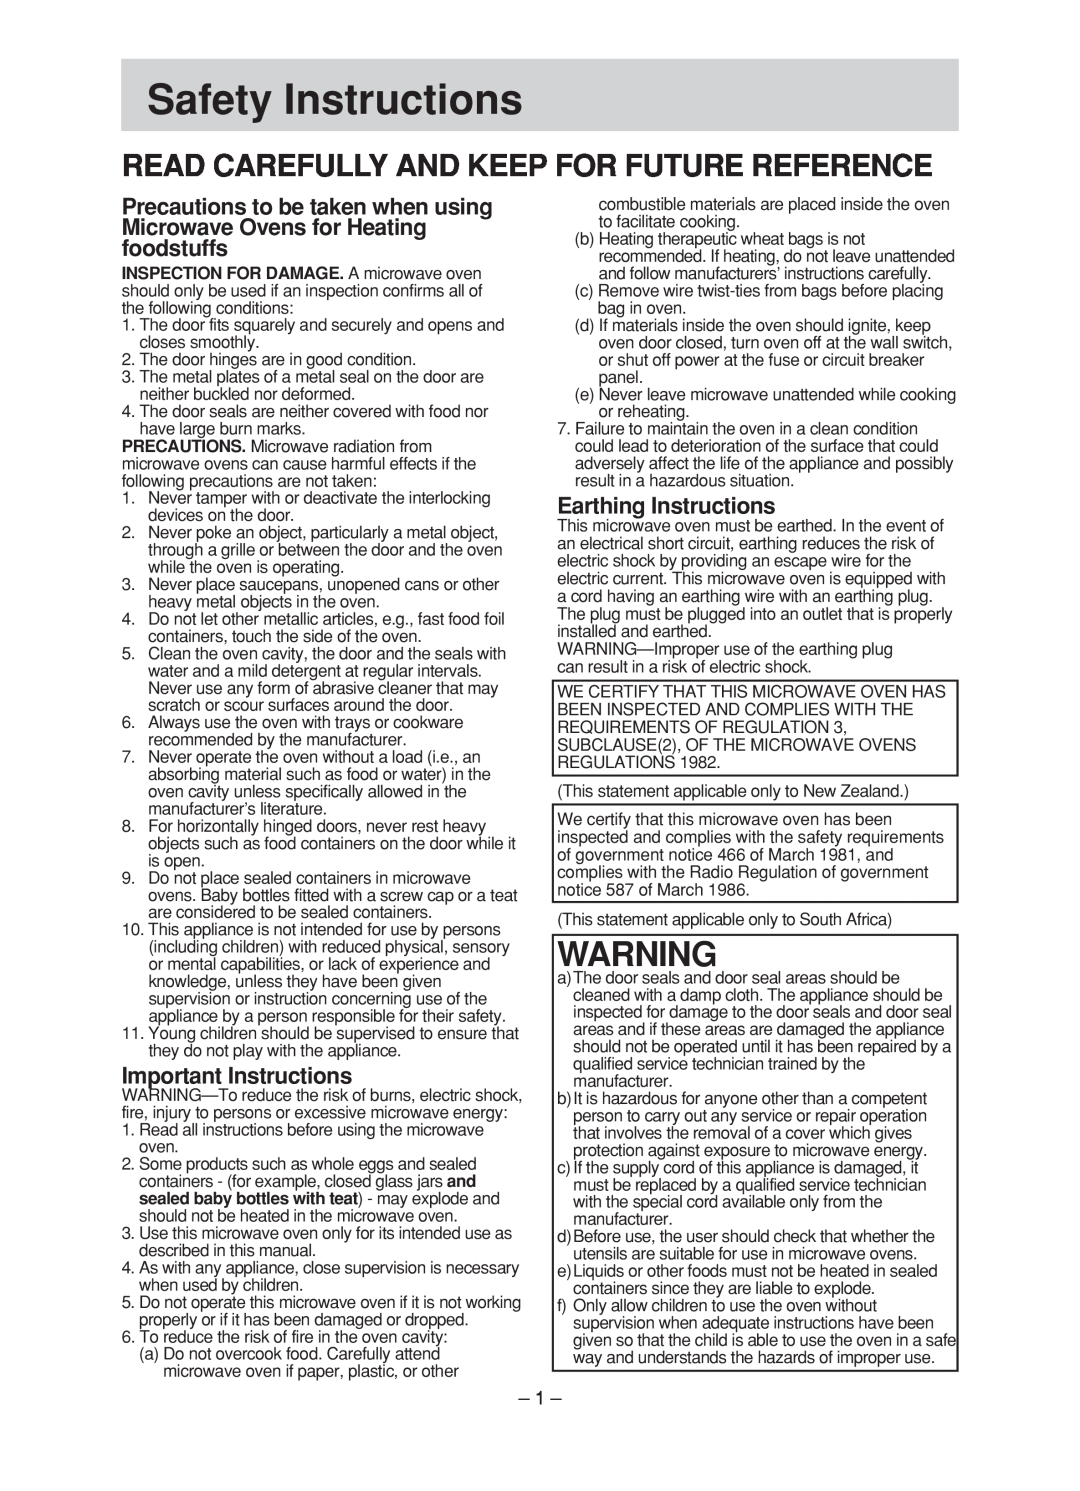 Panasonic NN-ST680S, NN-ST780S Safety Instructions, Read Carefully And Keep For Future Reference, Important Instructions 